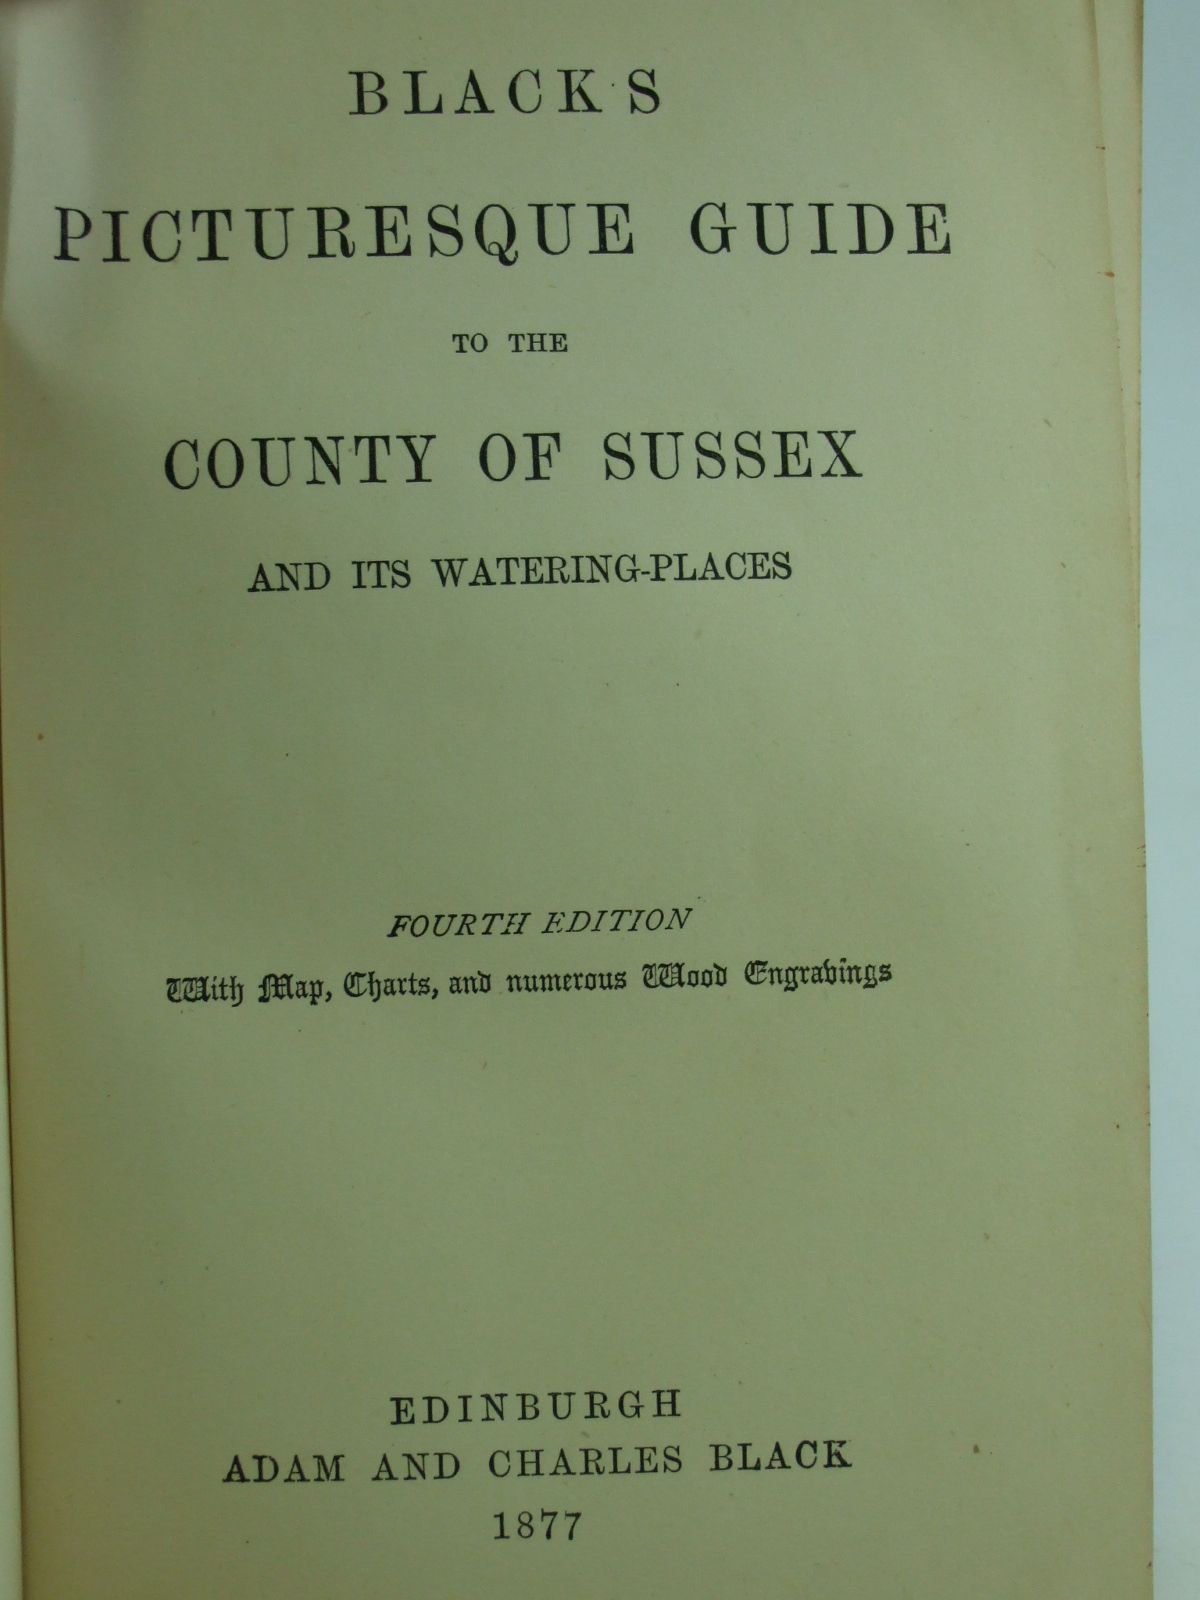 Photo of BLACK'S PICTURESQUE GUIDE TO THE COUNTY OF SUSSEX AND ITS WATERING-PLACES published by Adam & Charles Black (STOCK CODE: 1206783)  for sale by Stella & Rose's Books